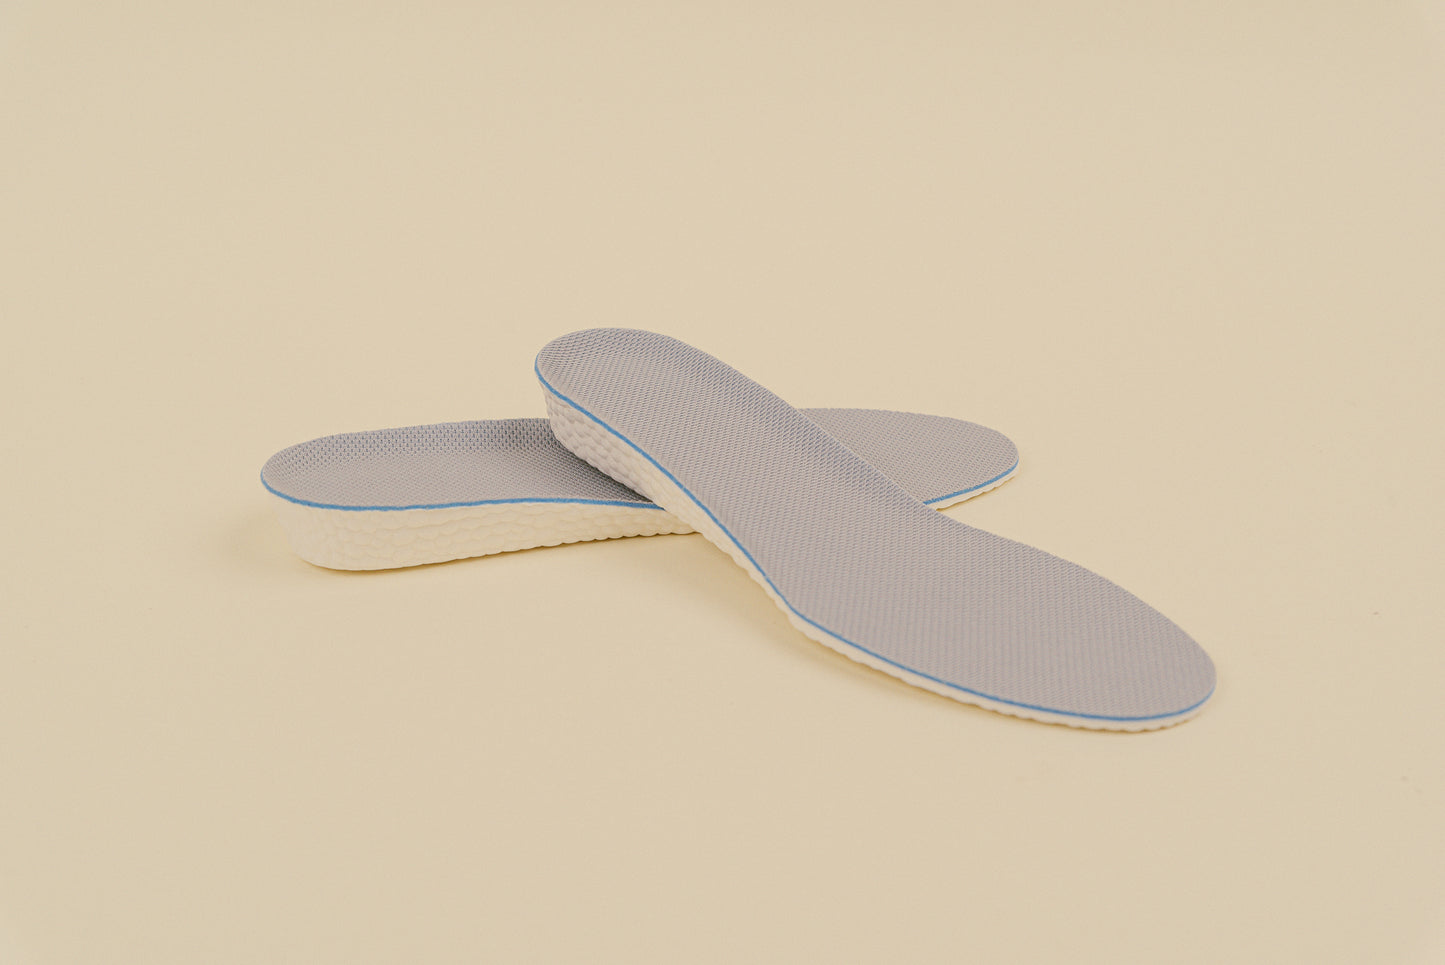 Brillaré foam sneaker insoles for sneakers, shoes, and boots. Boost style 6